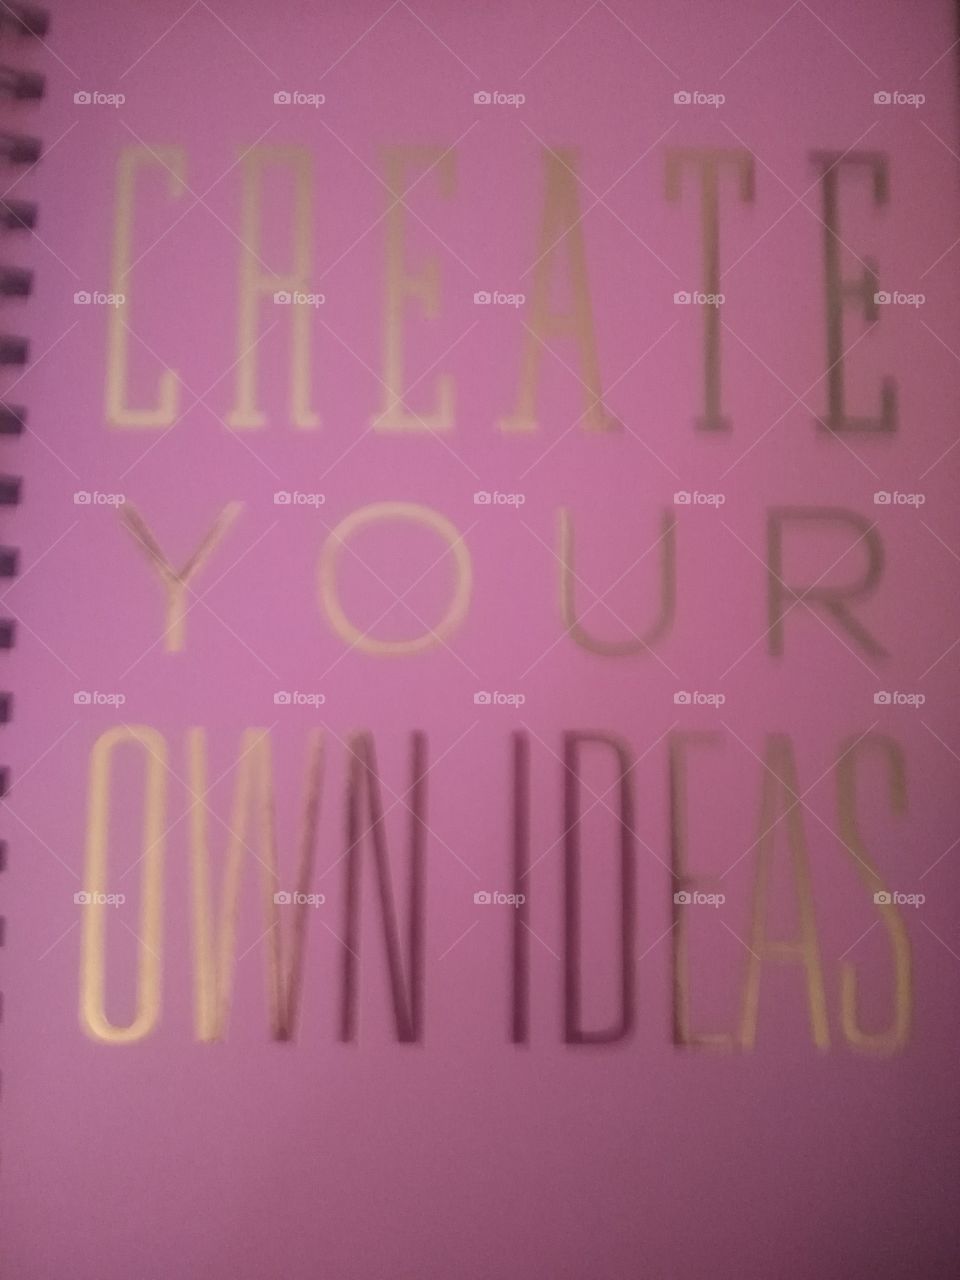 with your ideas